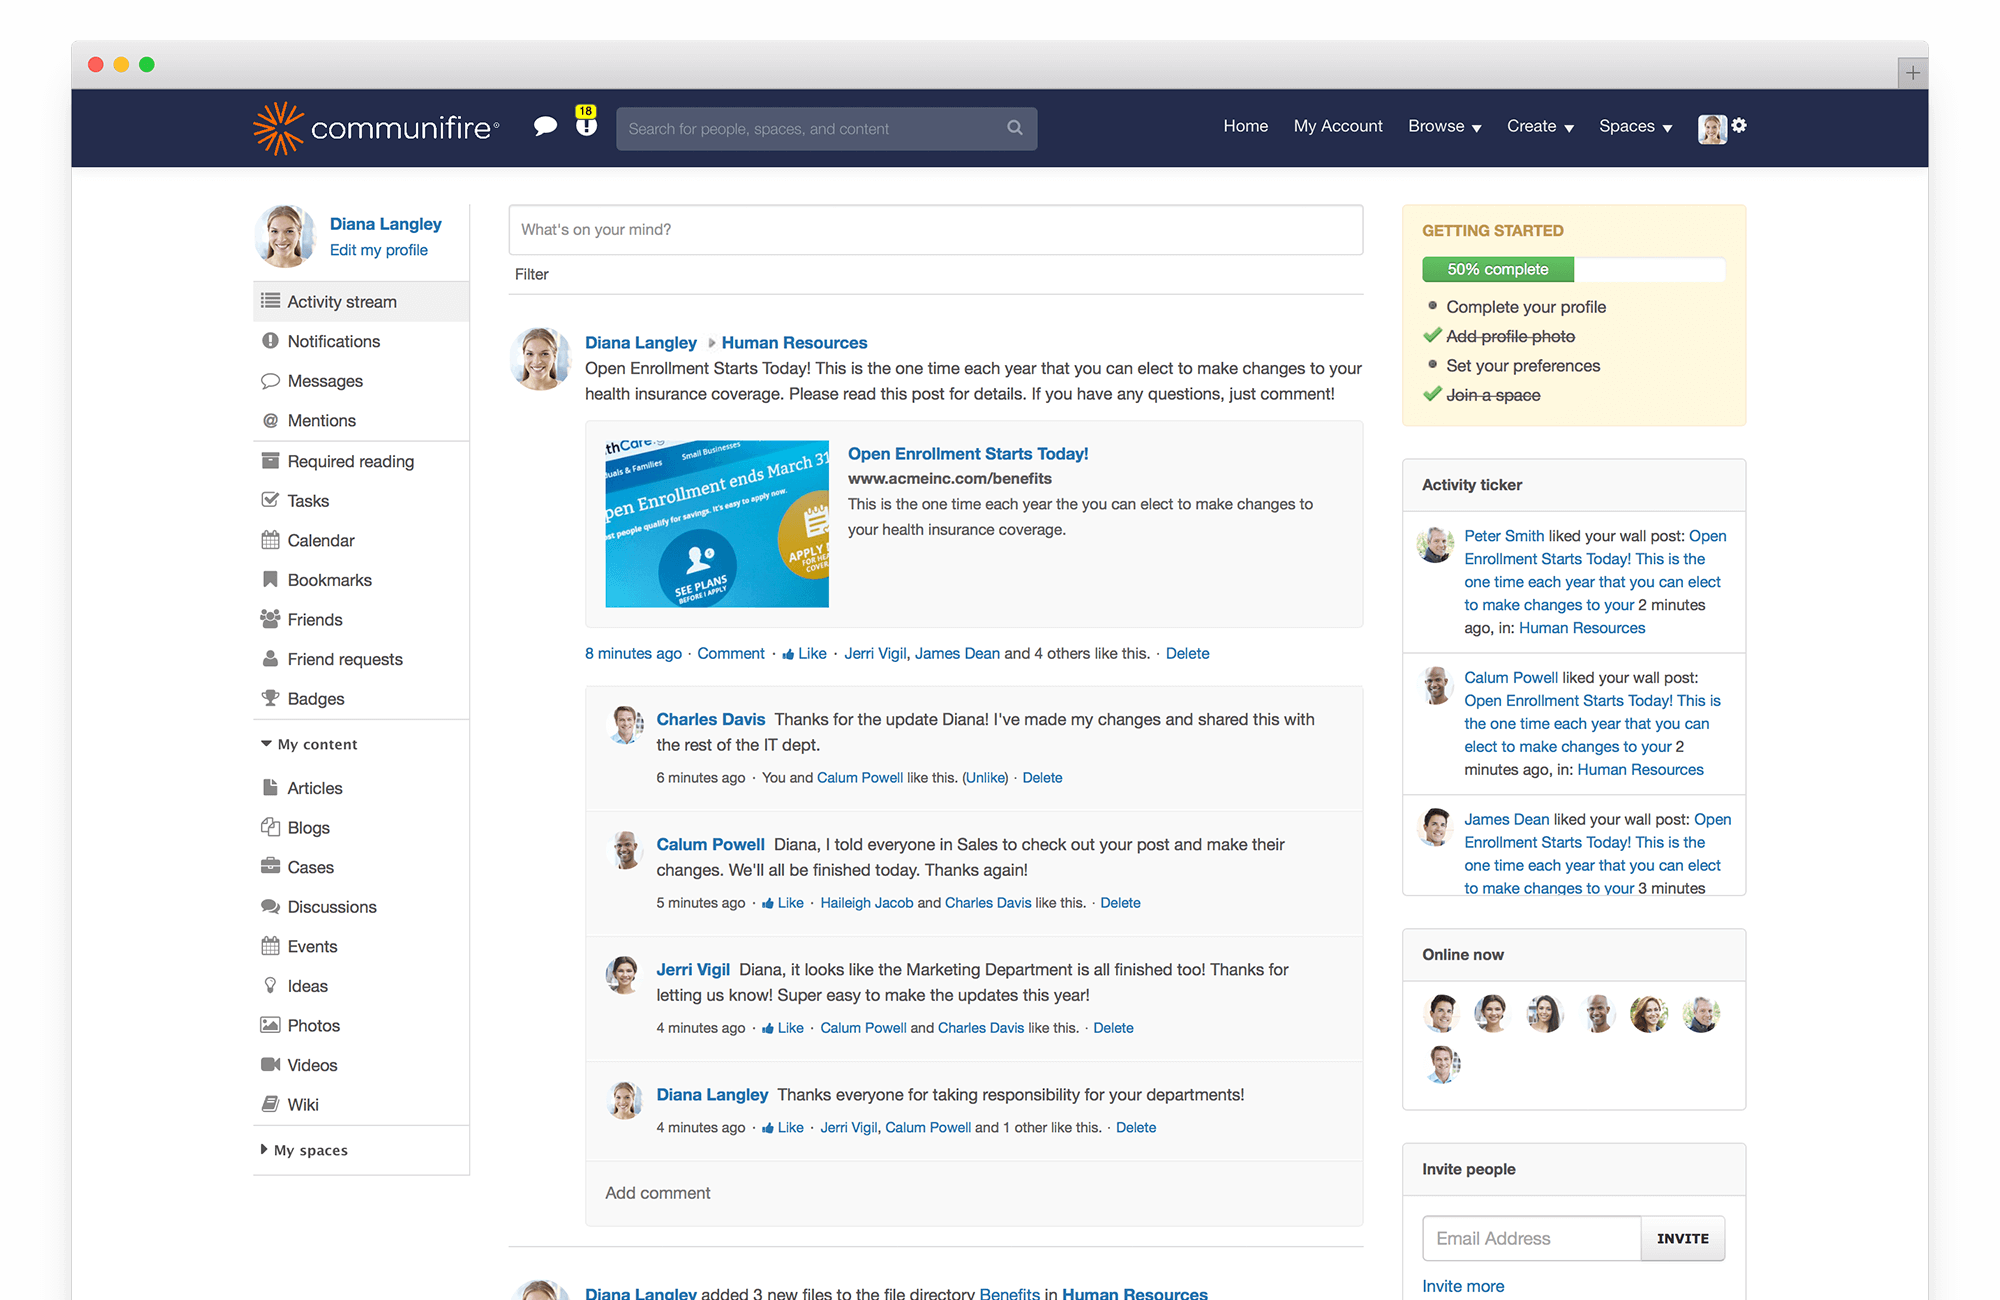 hr intranet tips - collaboration